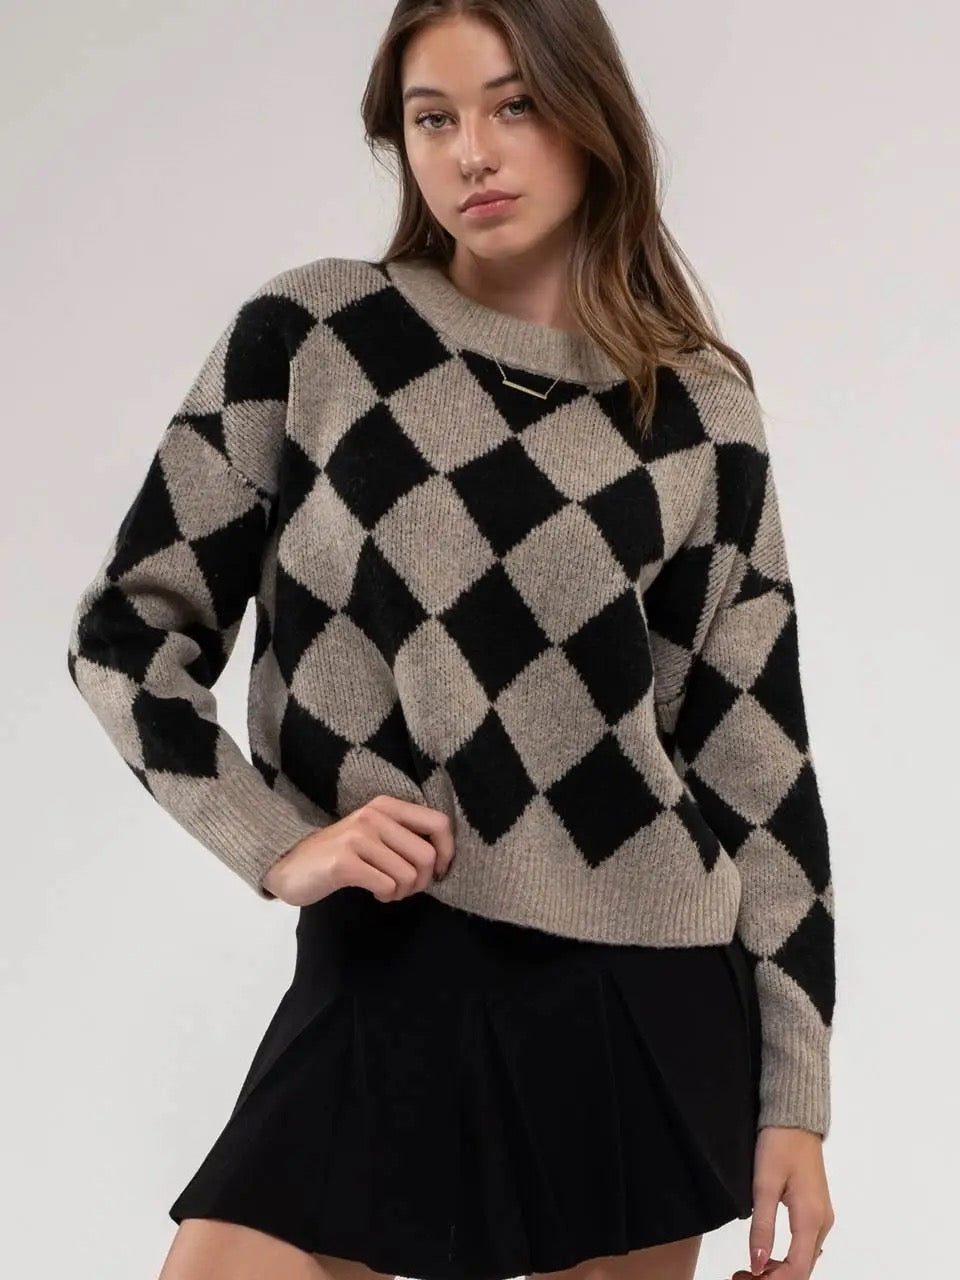 The Harlequin Sweater